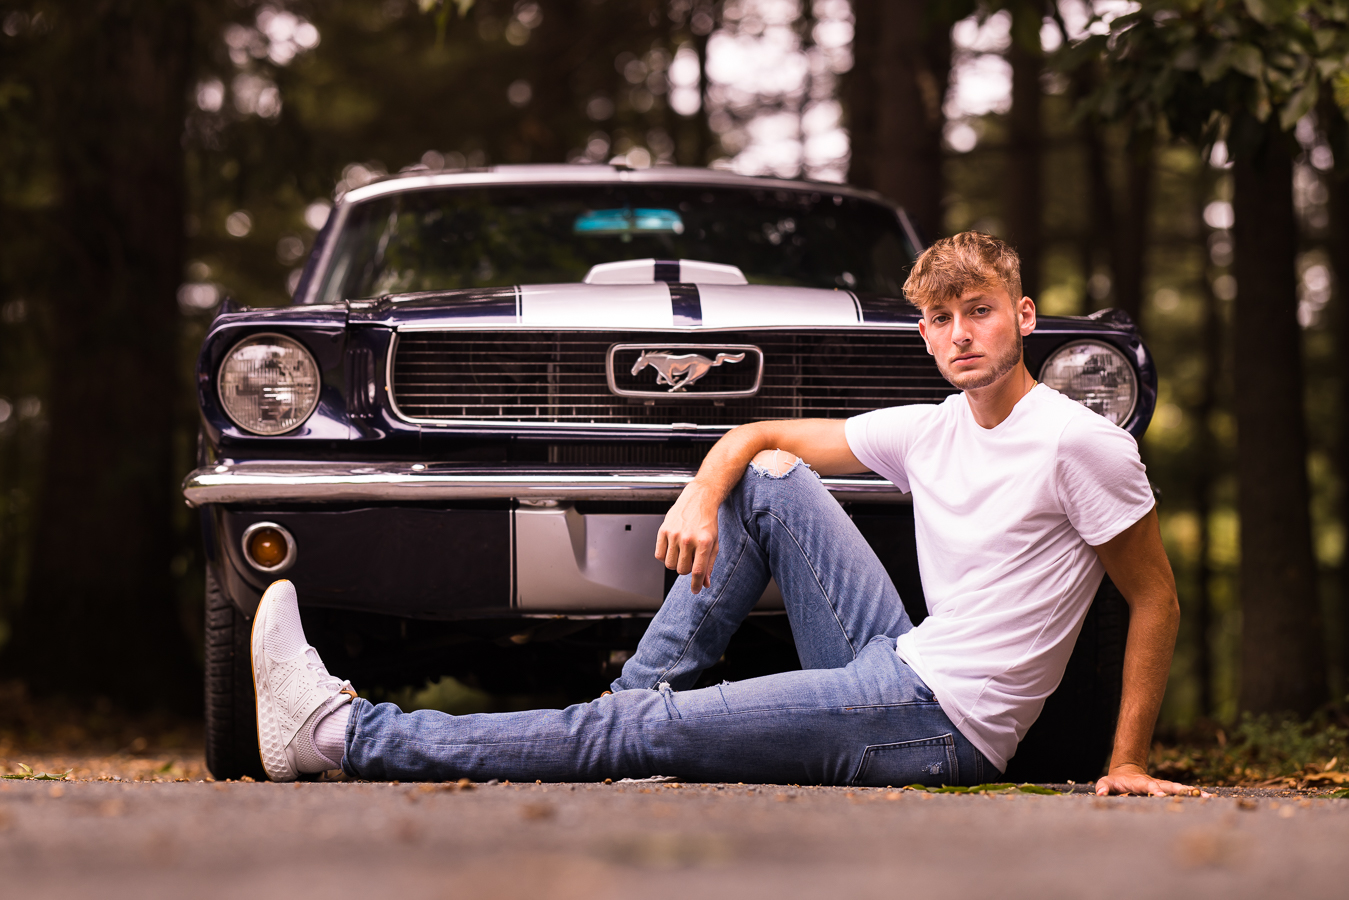 High school Senior Portrait Photographer, lisa rhinehart, captures this image of this senior as he sits in front of his 1966 mustang and shows it off behind him 